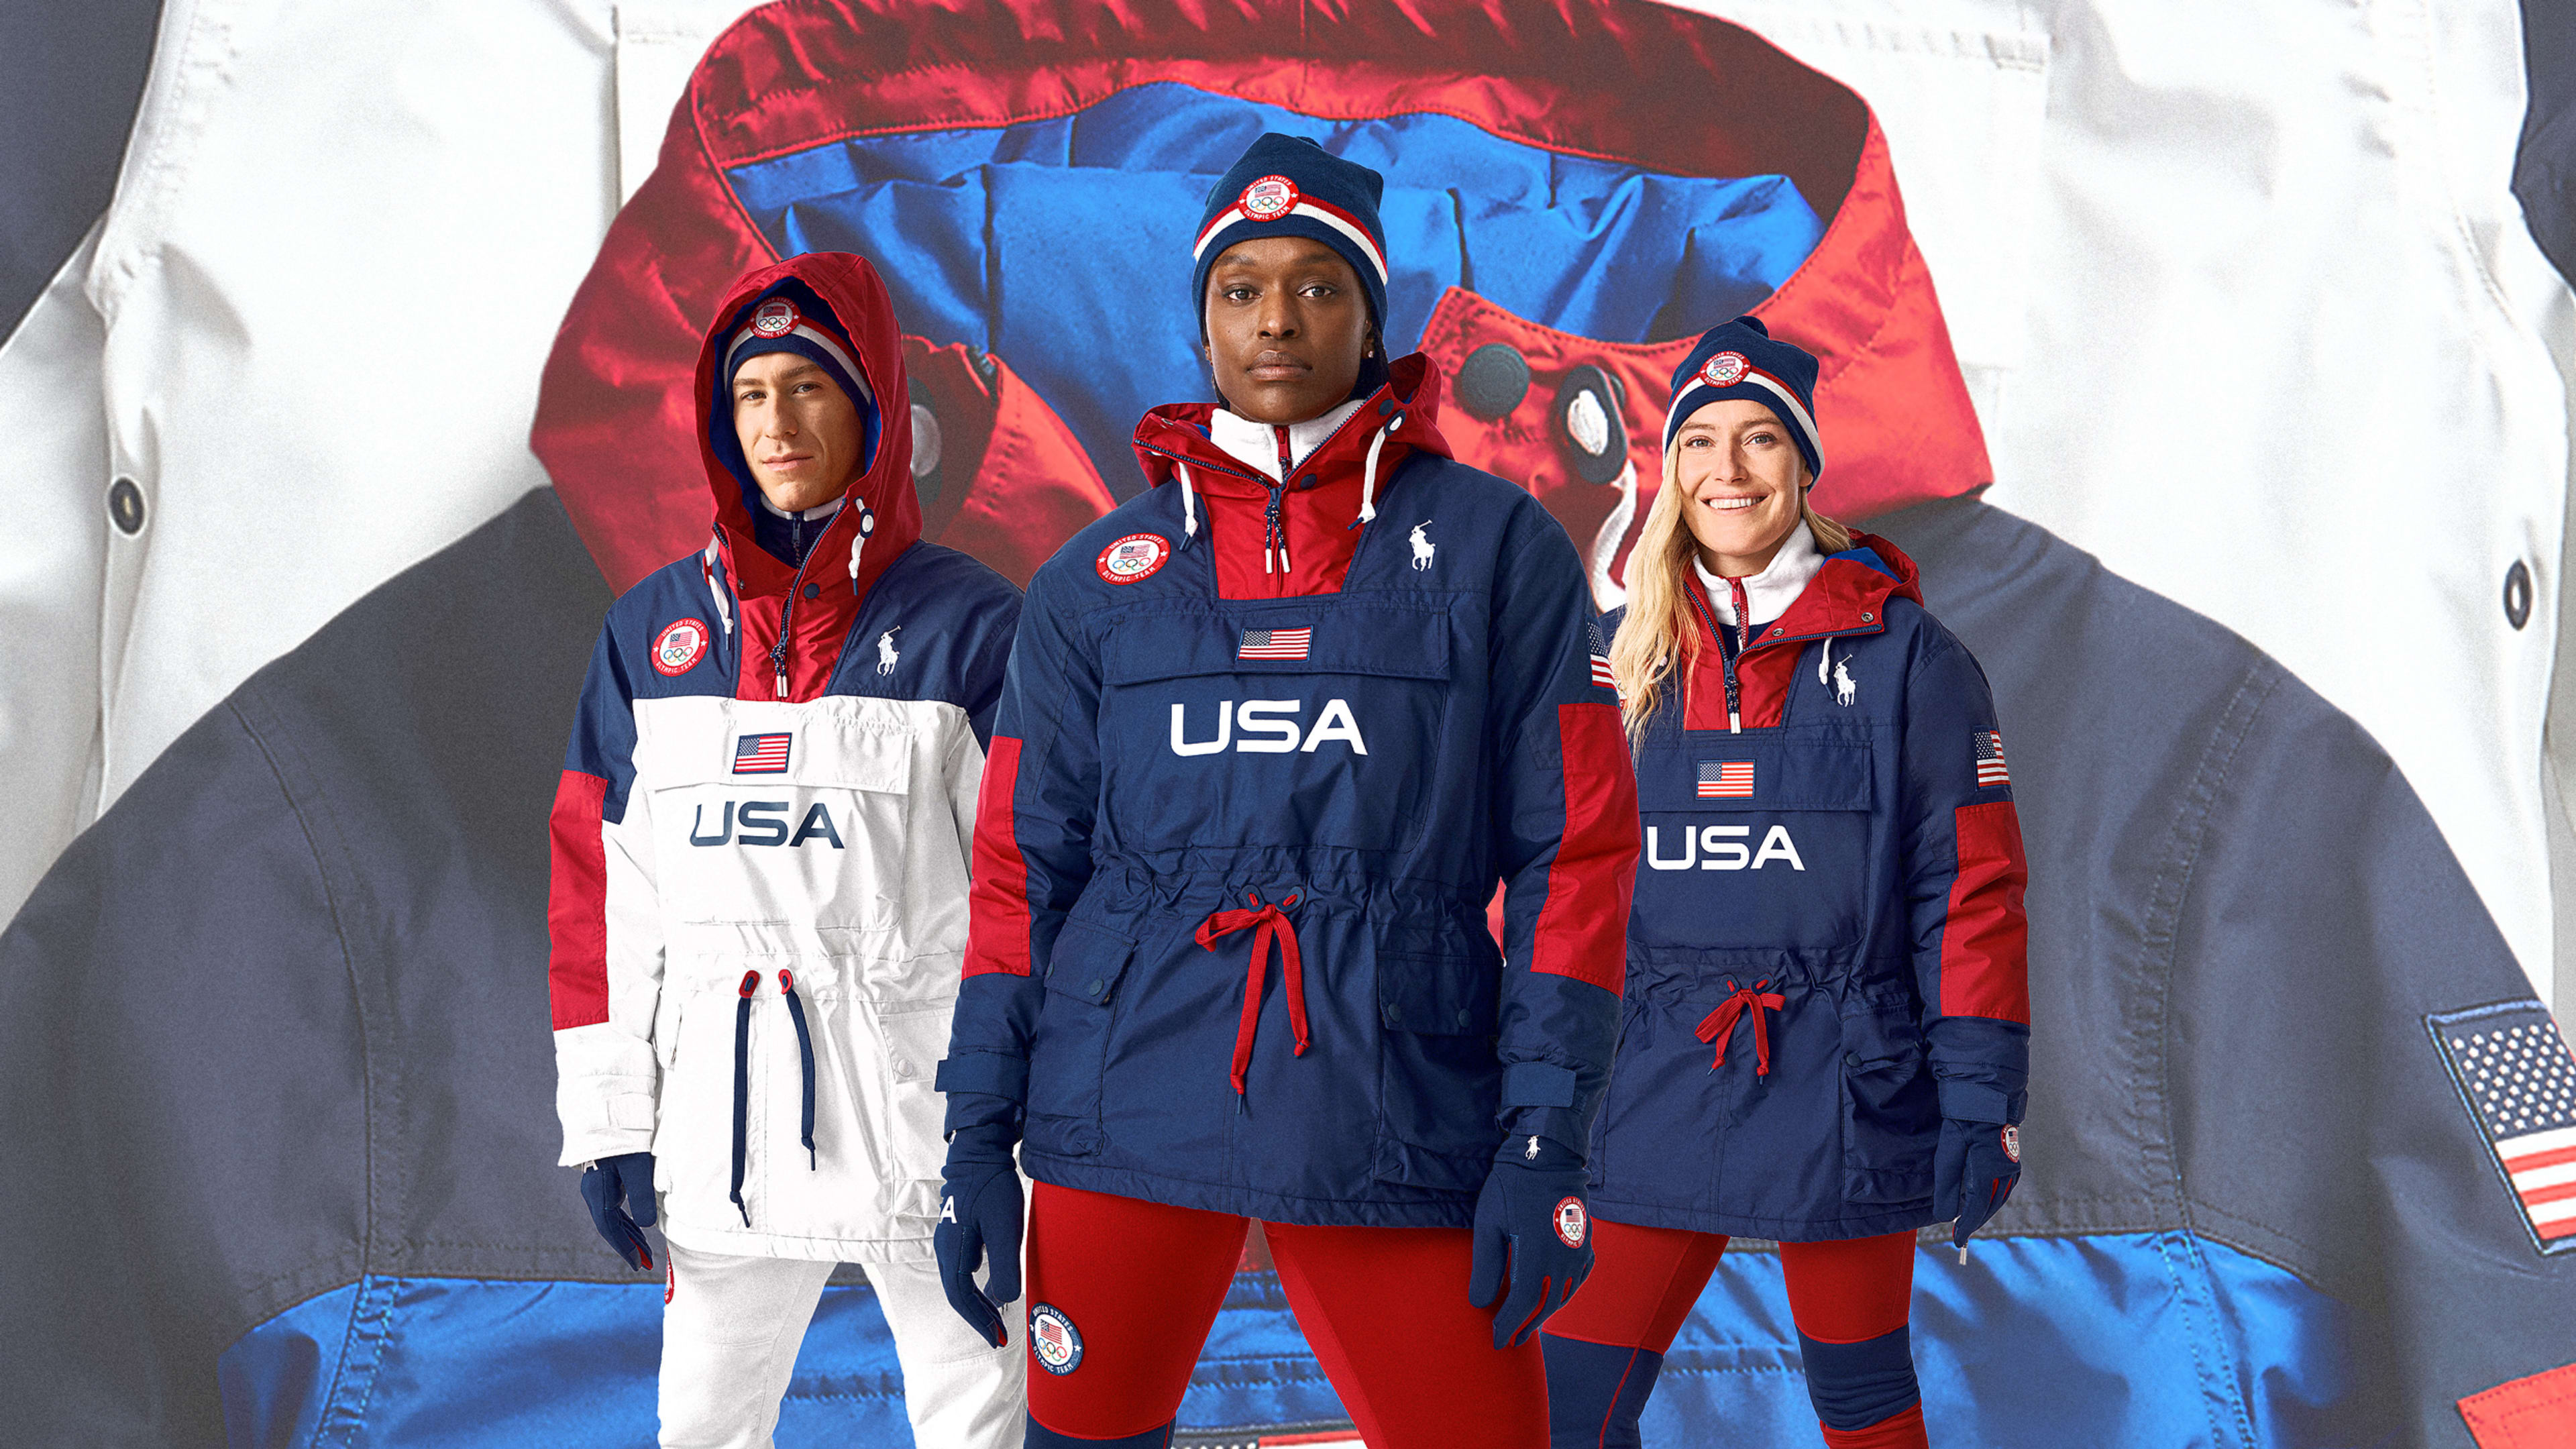 Ralph Lauren's Olympic jackets automatically adapt to athletes